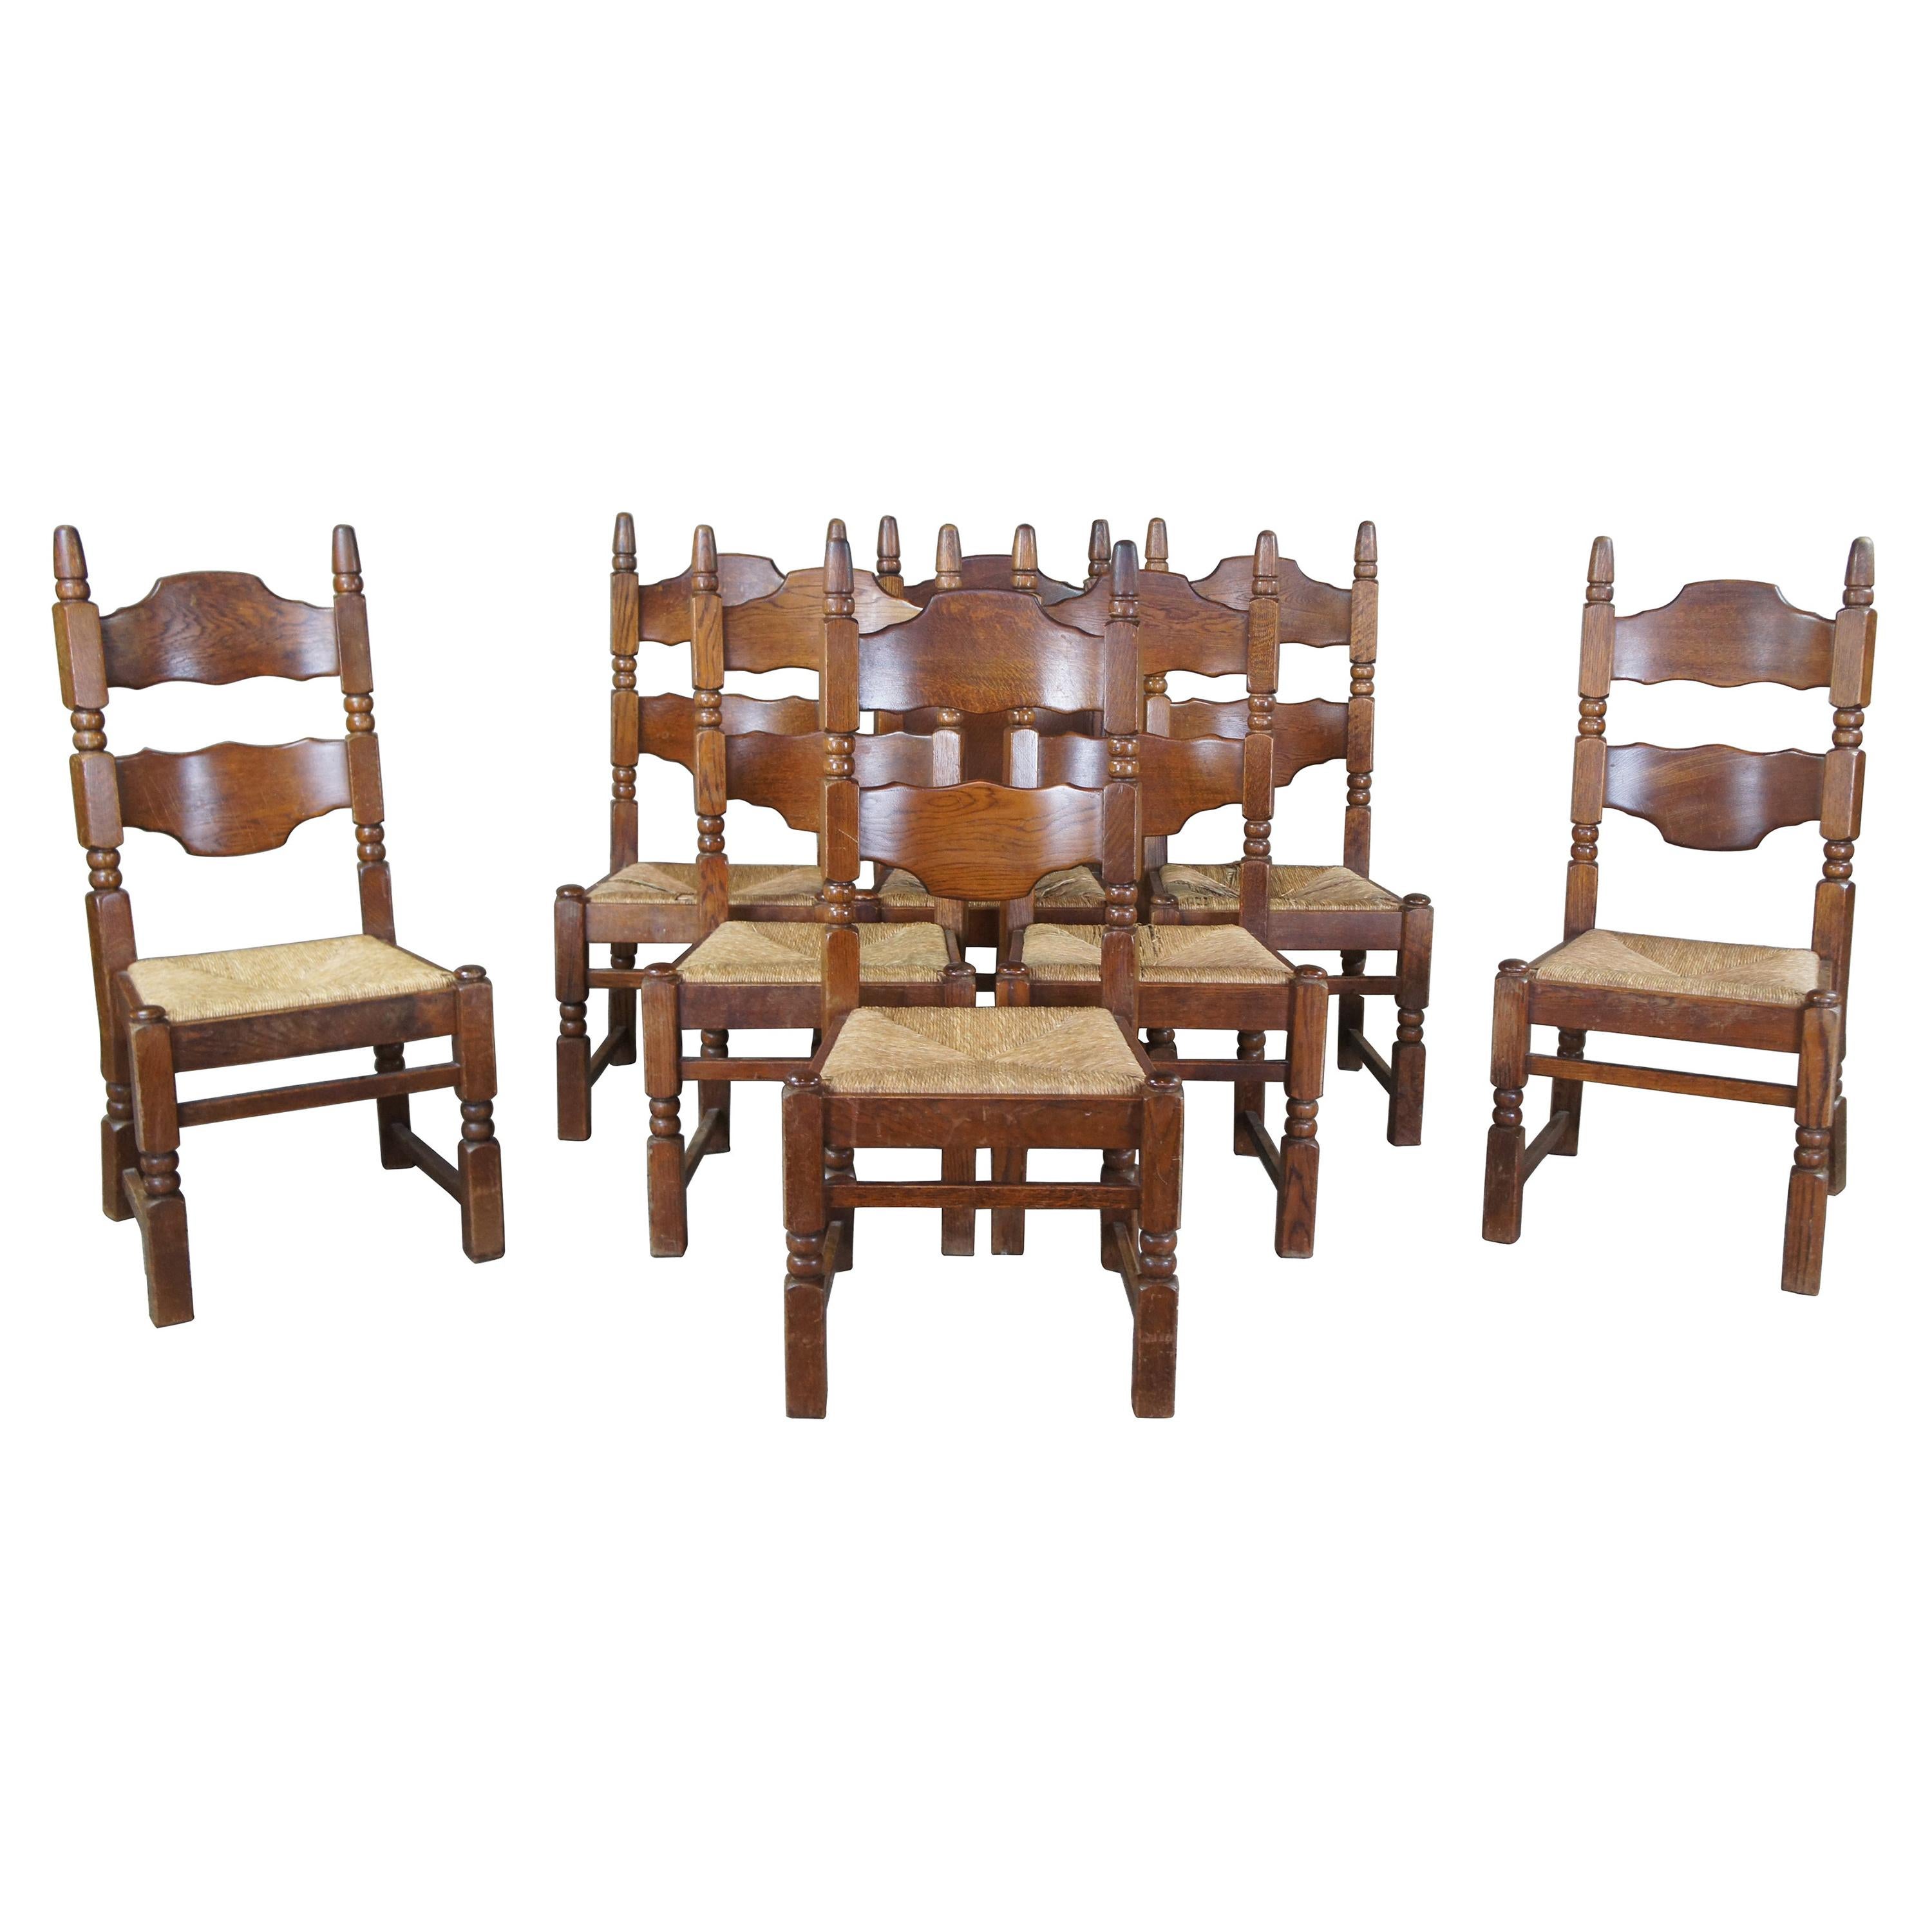 8 European Oak Old World Ladderback Rush Dining Side Chairs Country Farmhouse